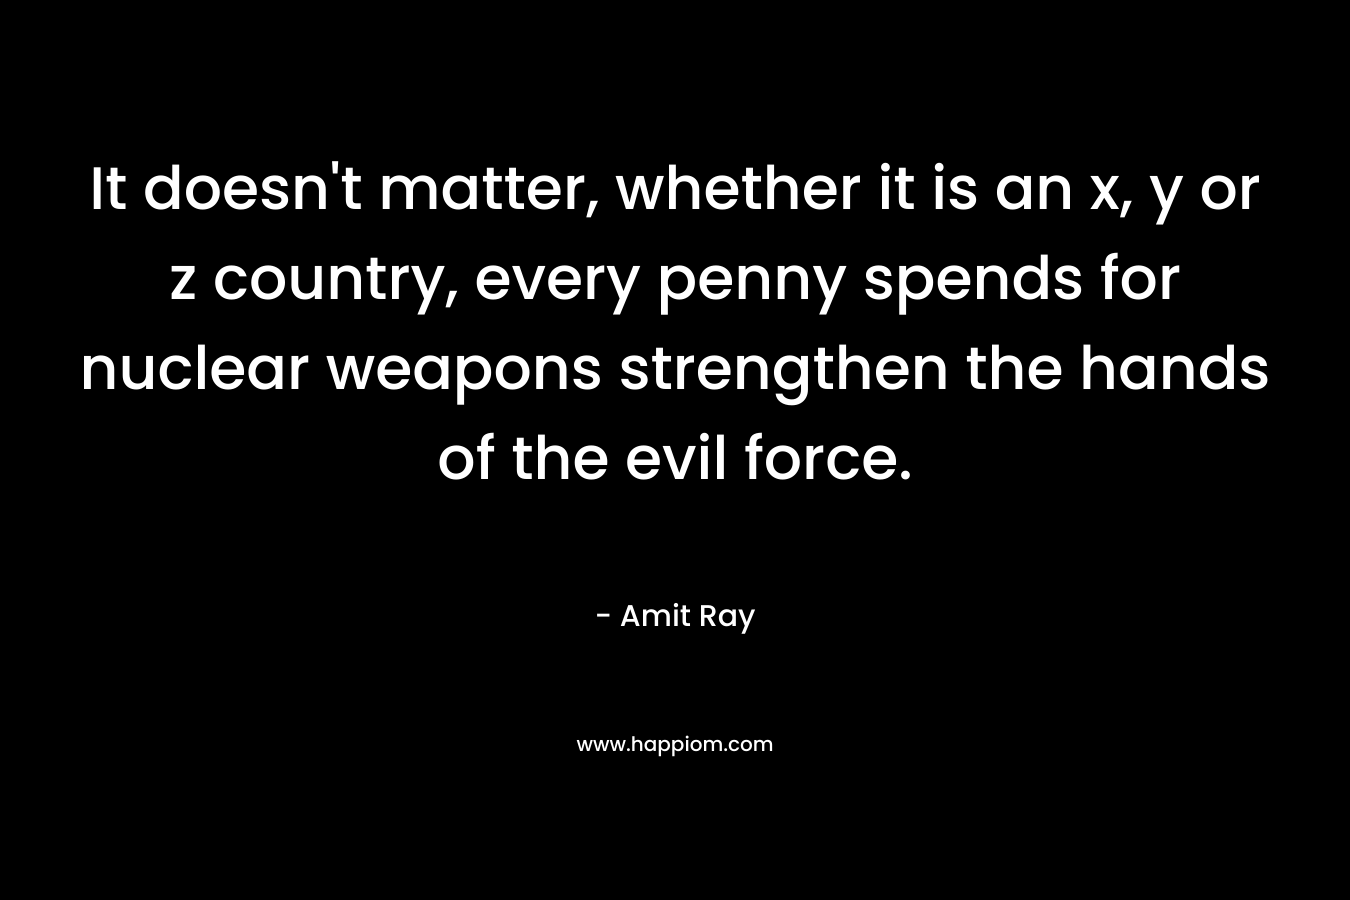 It doesn’t matter, whether it is an x, y or z country, every penny spends for nuclear weapons strengthen the hands of the evil force. – Amit Ray